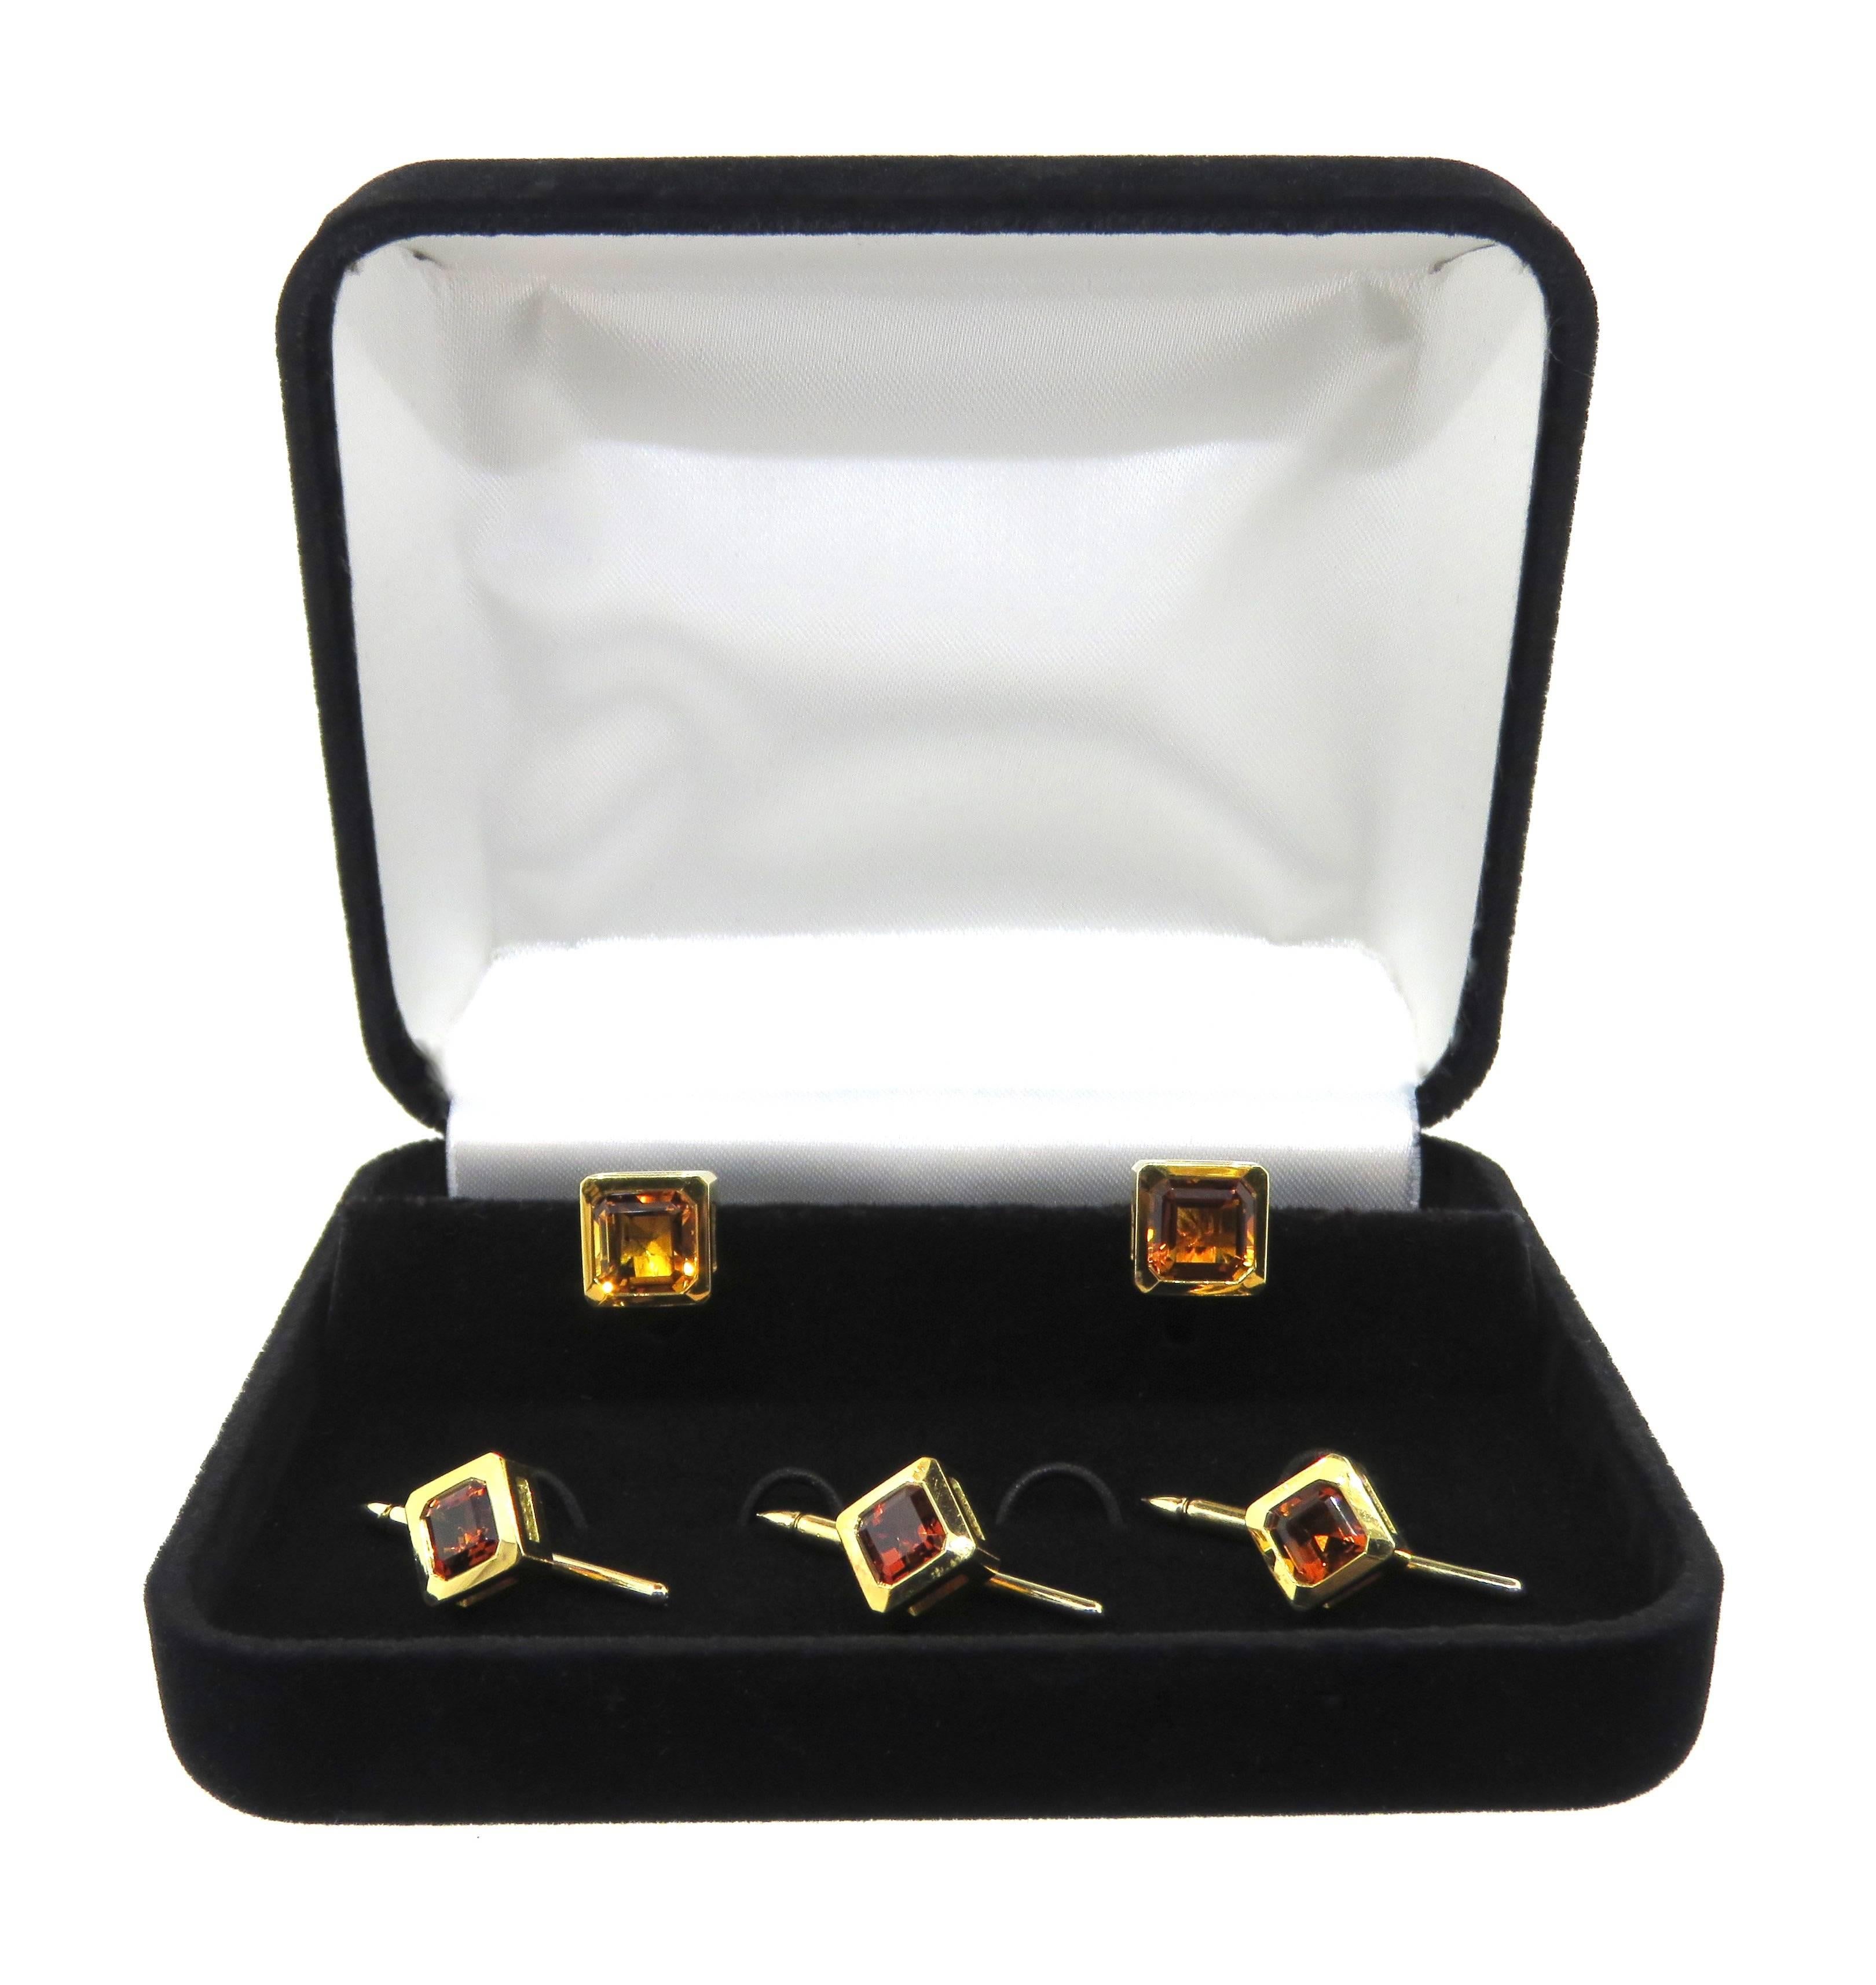 Cartier handsome smoky topaz cufflinks and matching stud set.

An excellent pair of Cartier 18K yellow gold smoky topaz cufflinks with three matching shirt studs. These whaleback closure style cufflinks are both traditional and contemporary in